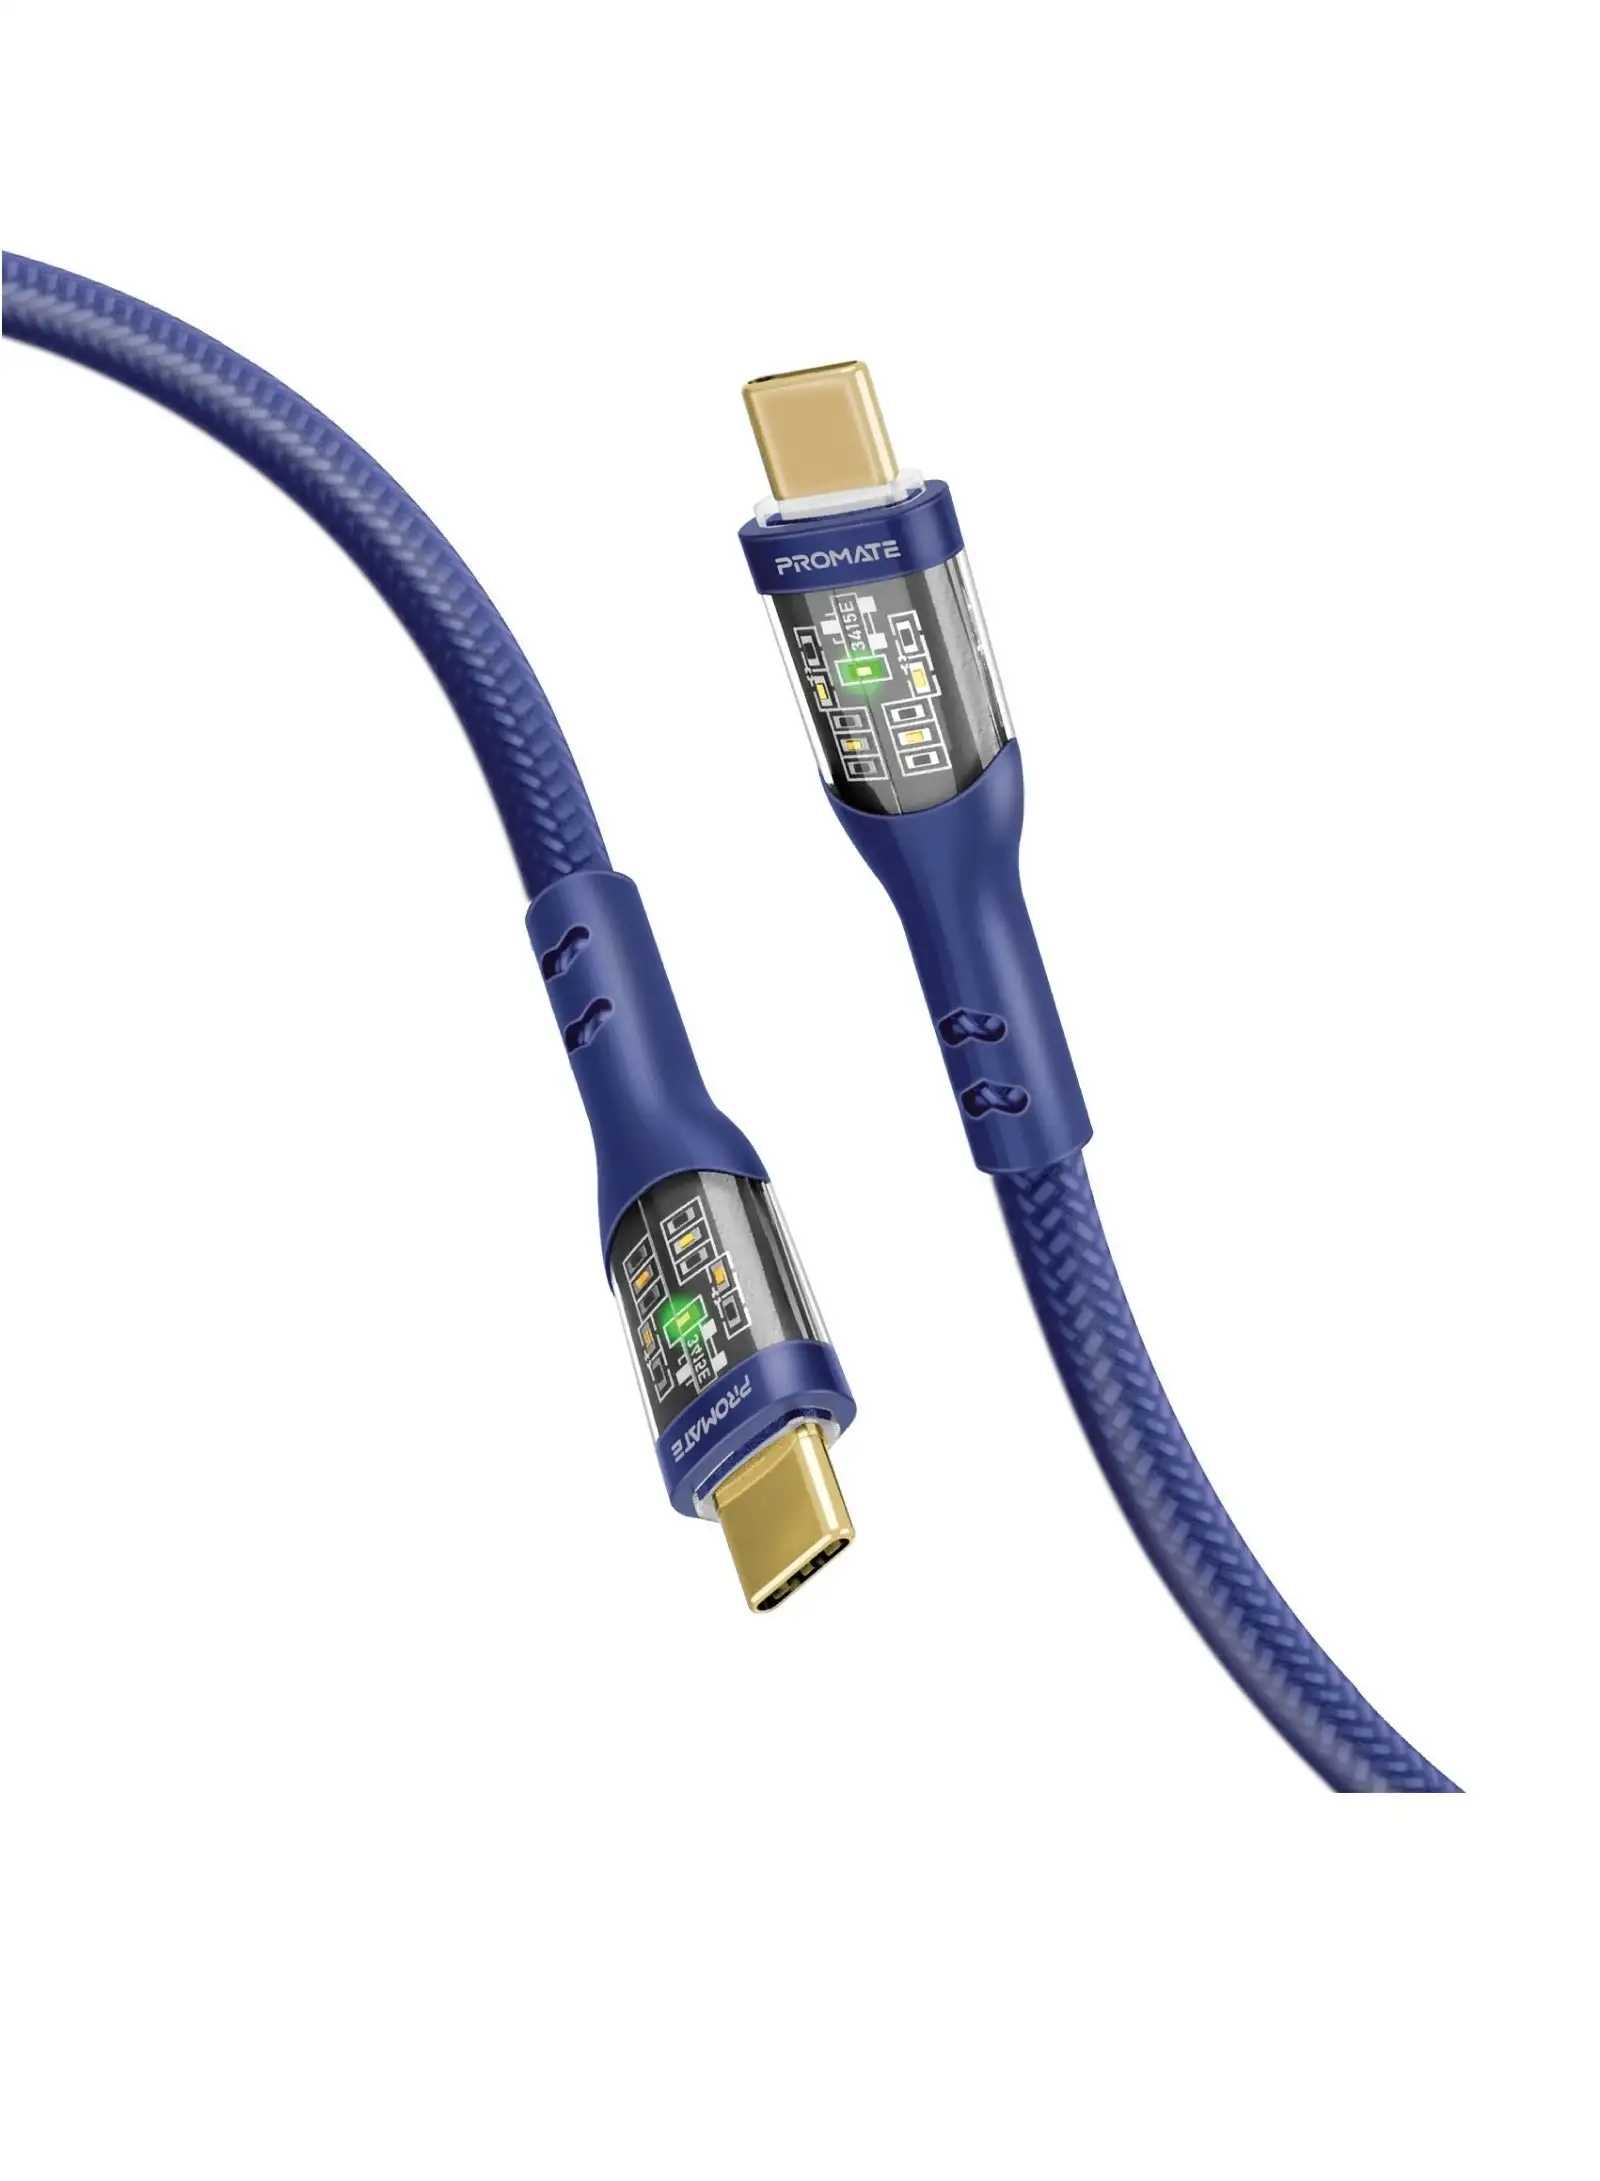 PROMATE Promate USB-C Charging Cable, Stylish Transparent Shelled Type-C Cable with 60W Fast Power Delivery, 480Mbps Data Transfer and Durable 120cm Nylon Braided Cord,  TransLine-CC Blue